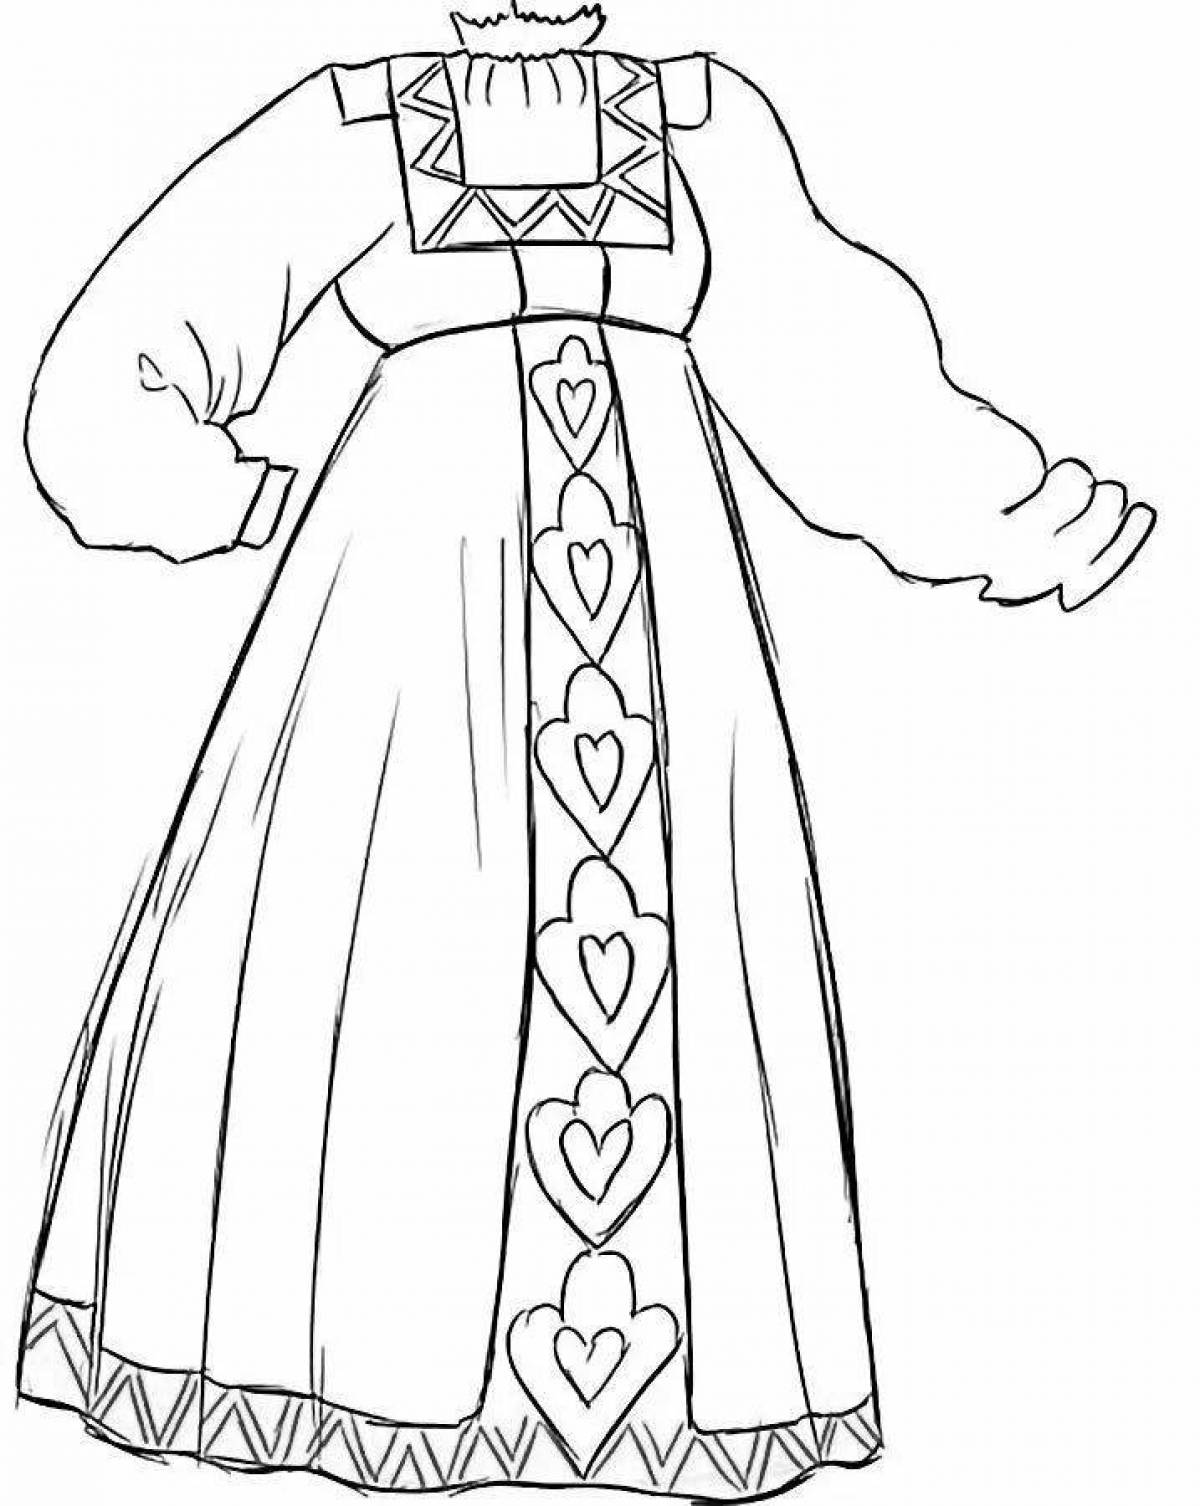 Coloring page cheerful national costume of Russia